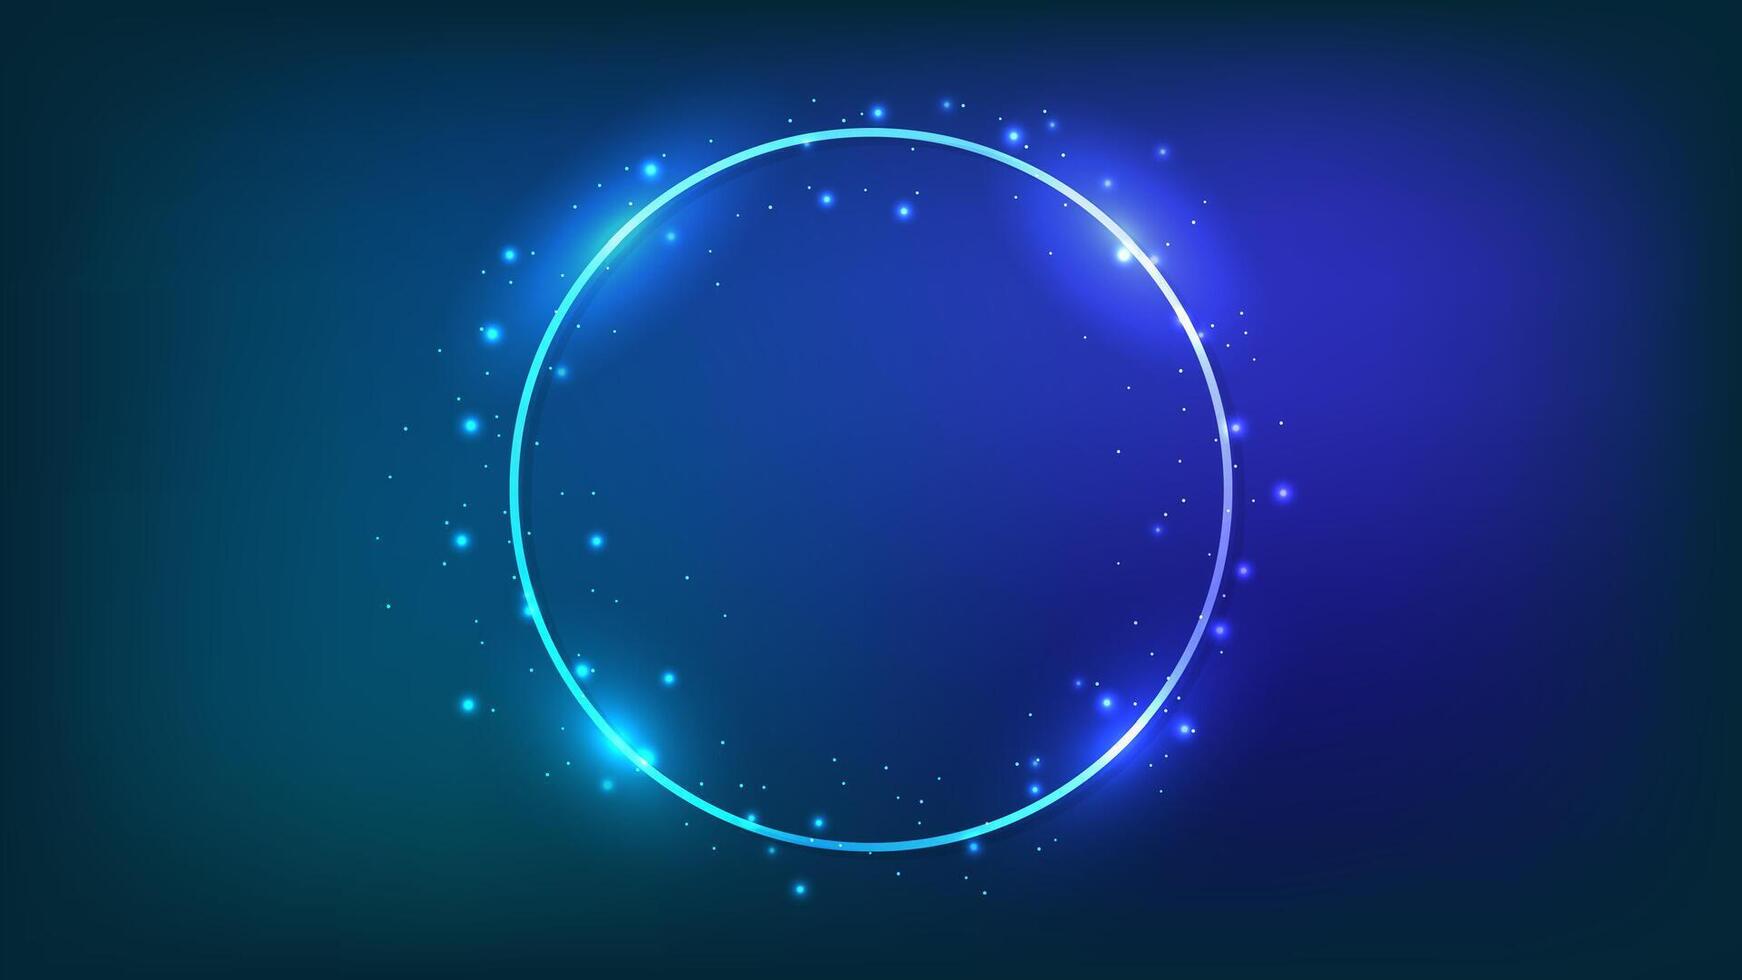 Neon round frame with shining effects vector